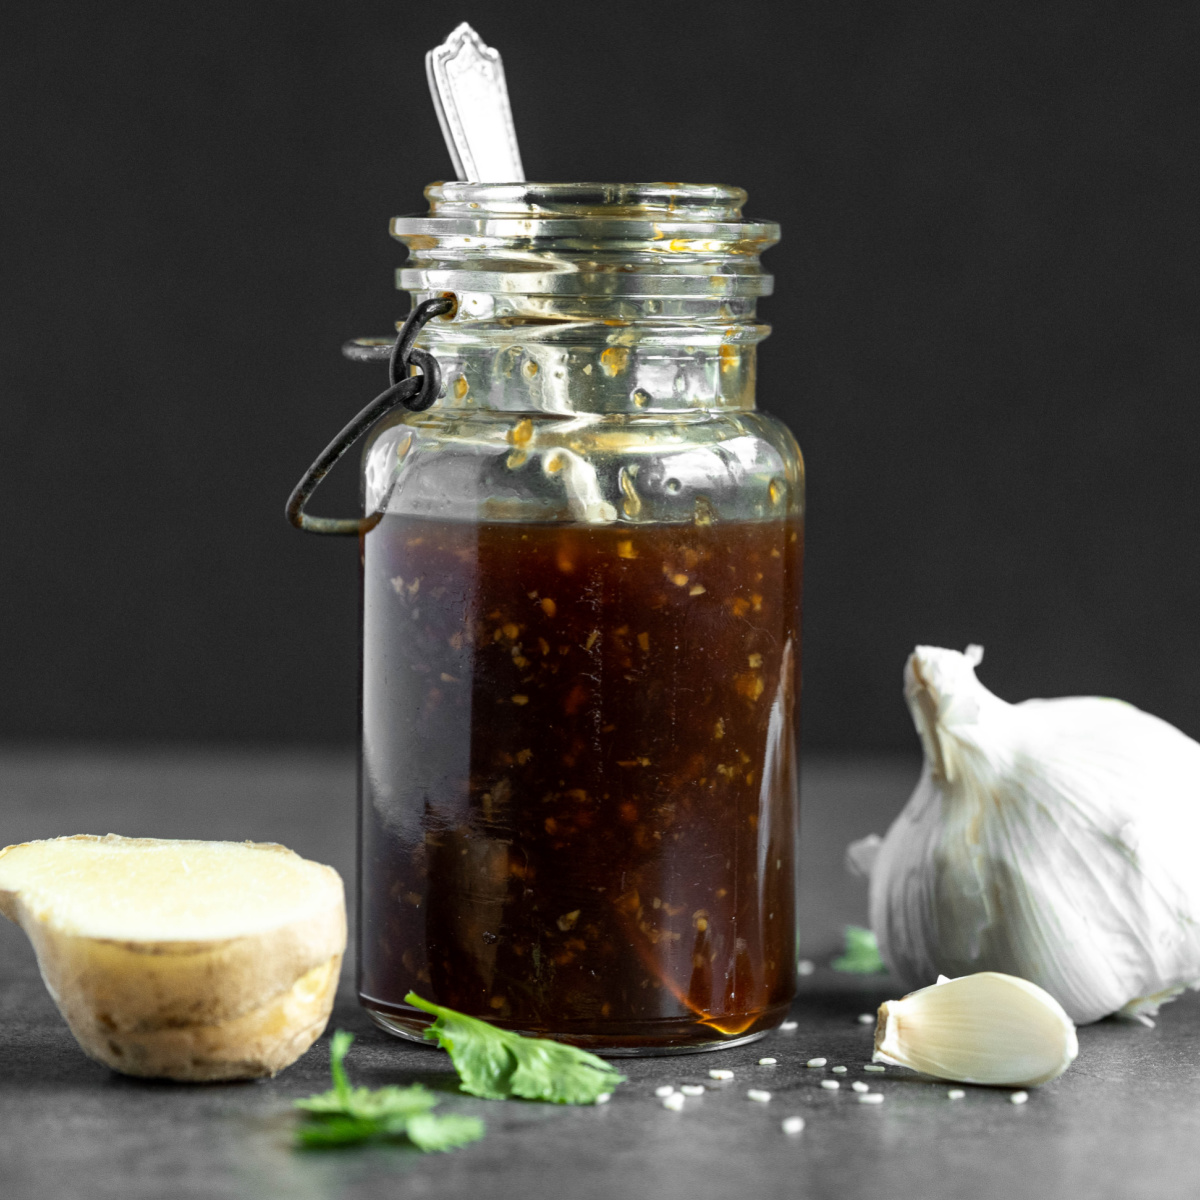 Glass jar of teriyaki sauce with a clove of garlic and piece of ginger beside the jar.